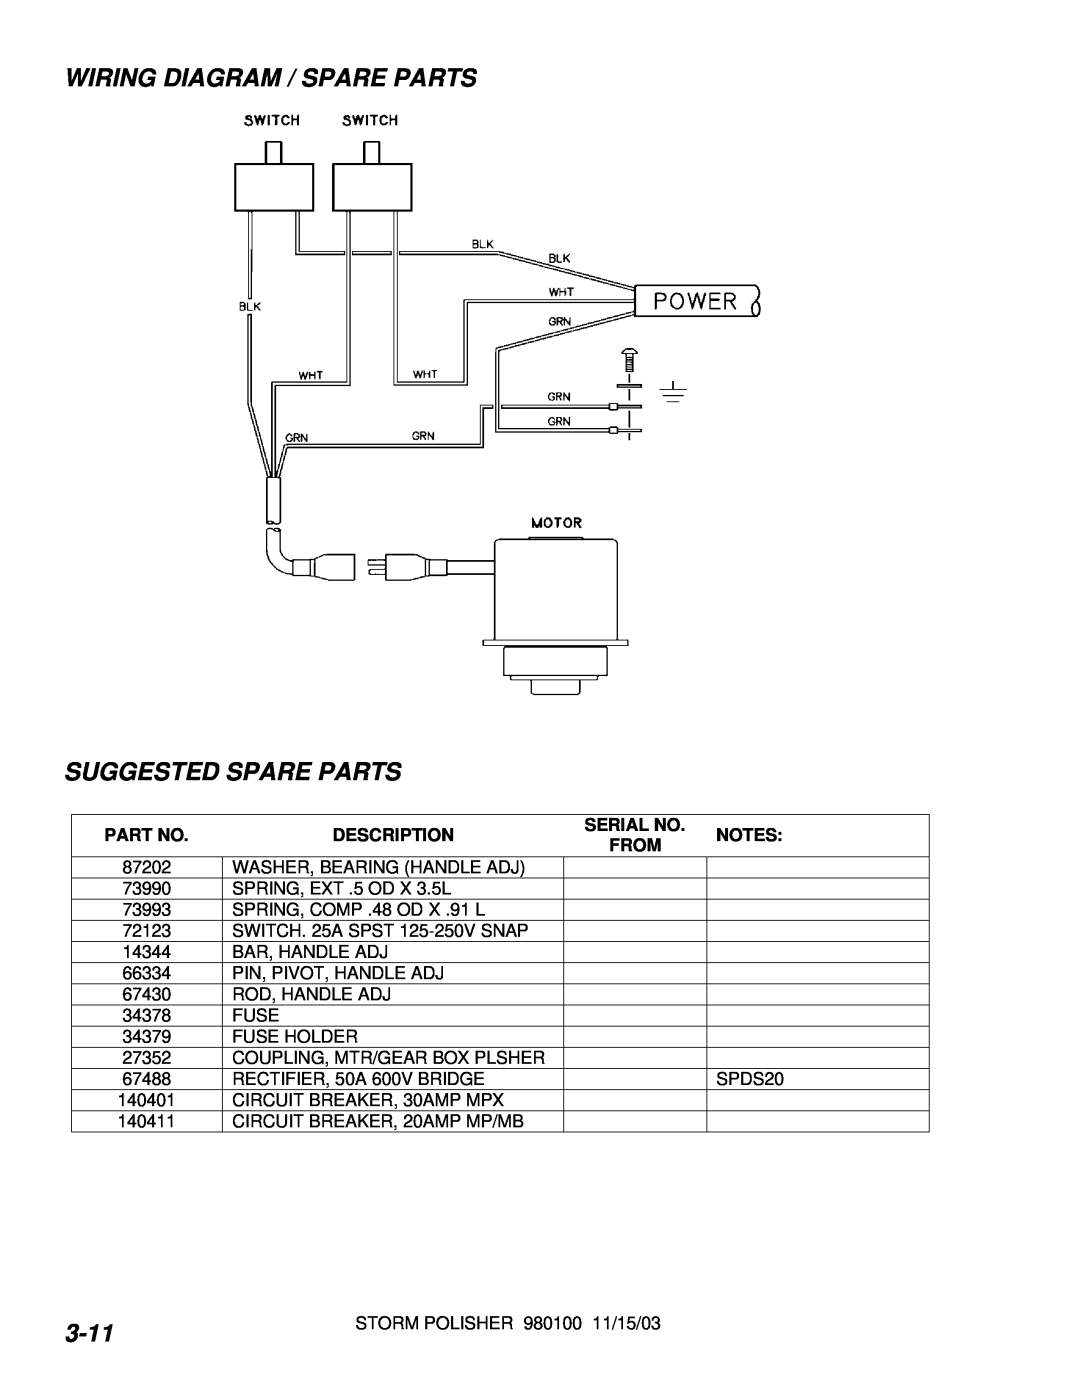 Windsor SP20, SP17 Wiring Diagram / Spare Parts, Suggested Spare Parts, 3-11, Serial No, Part No, Description, From, Notes 